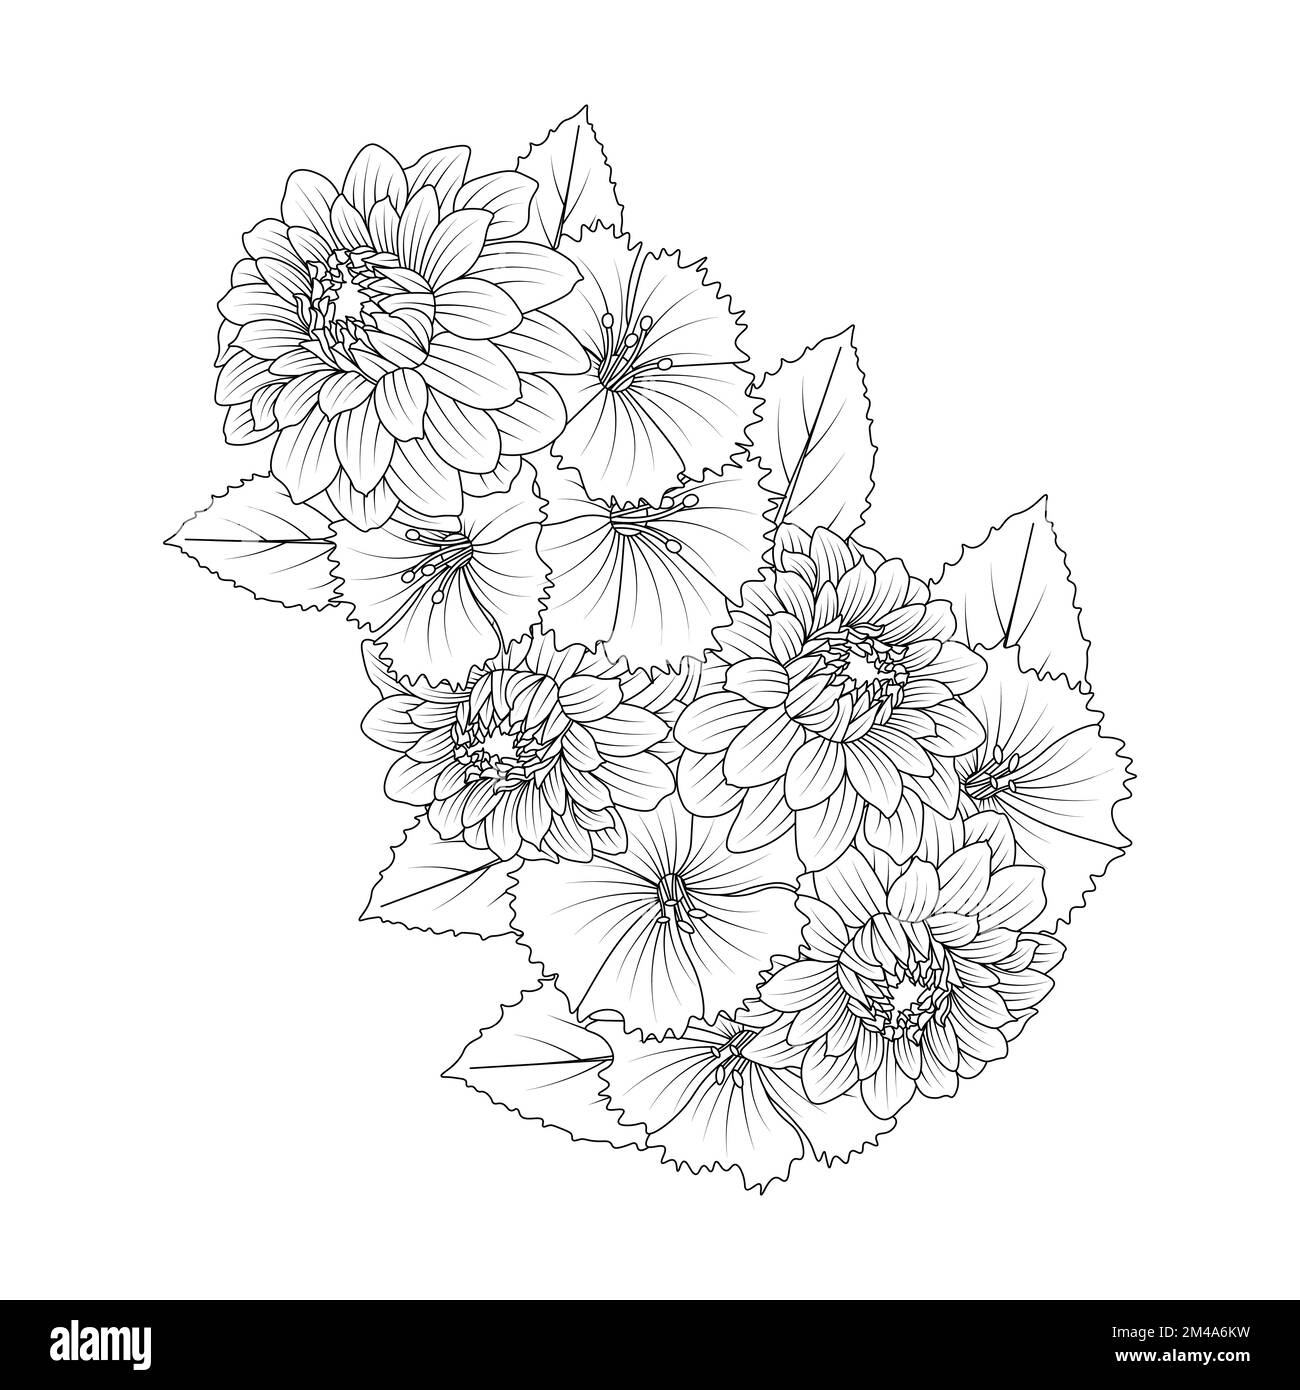 Rose flower pencil drawing Royalty Free Vector Image